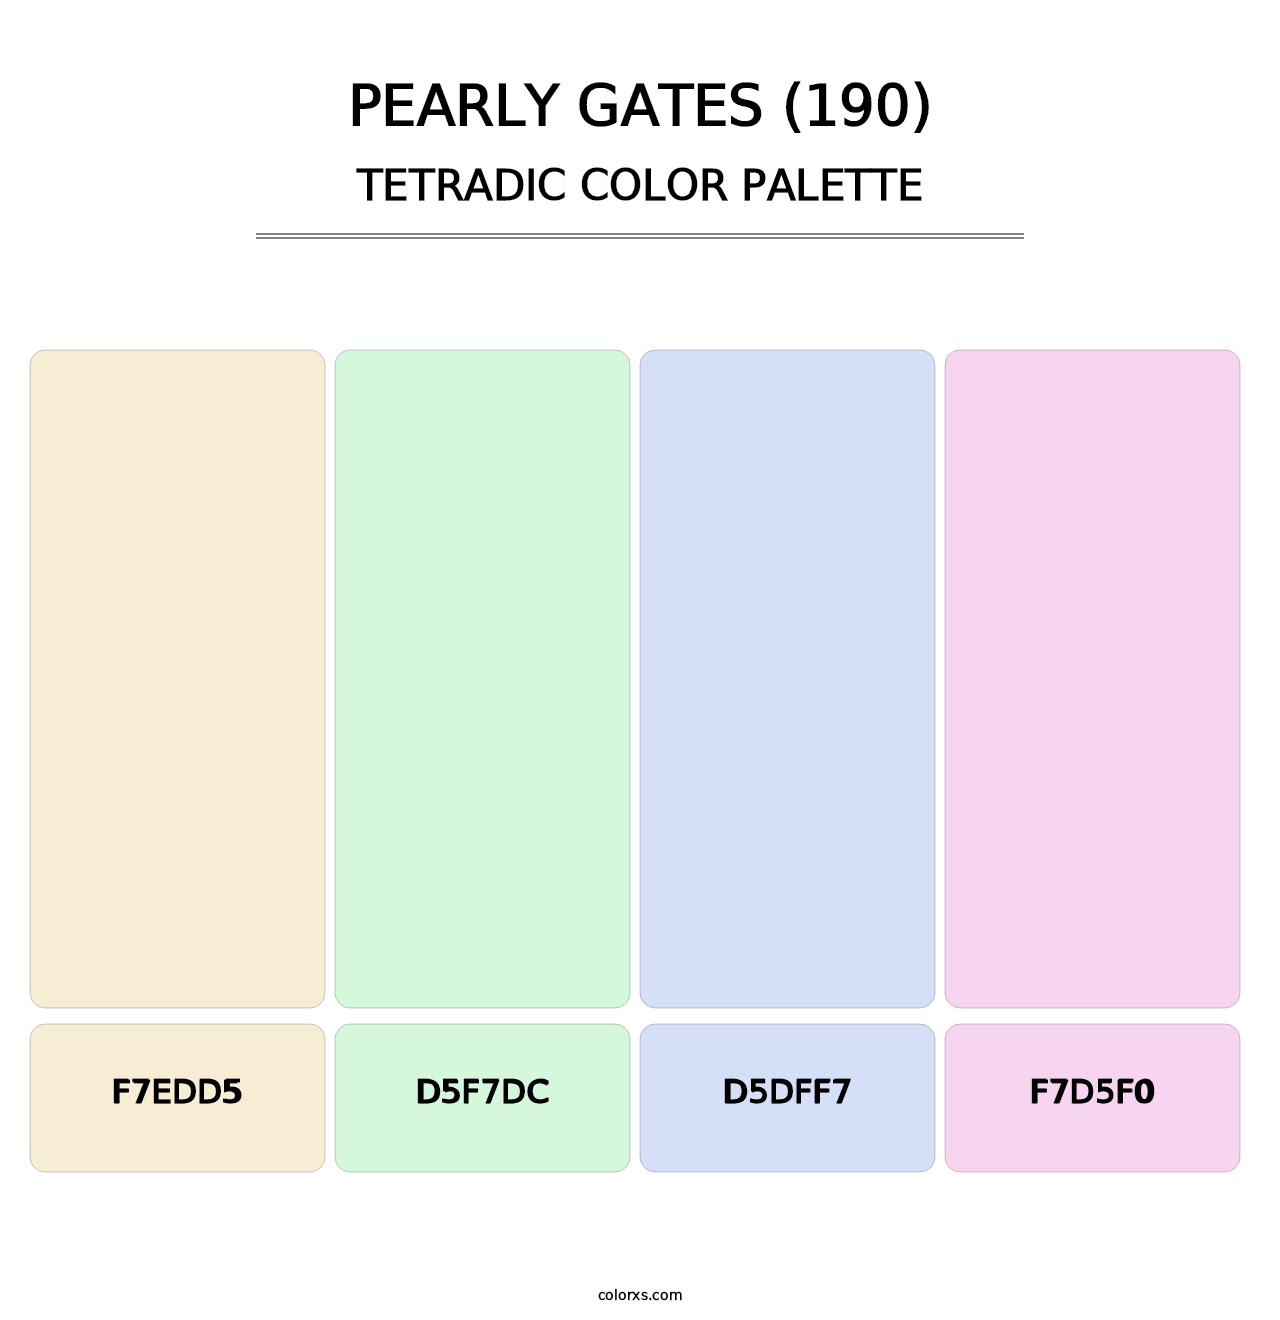 Pearly Gates (190) - Tetradic Color Palette